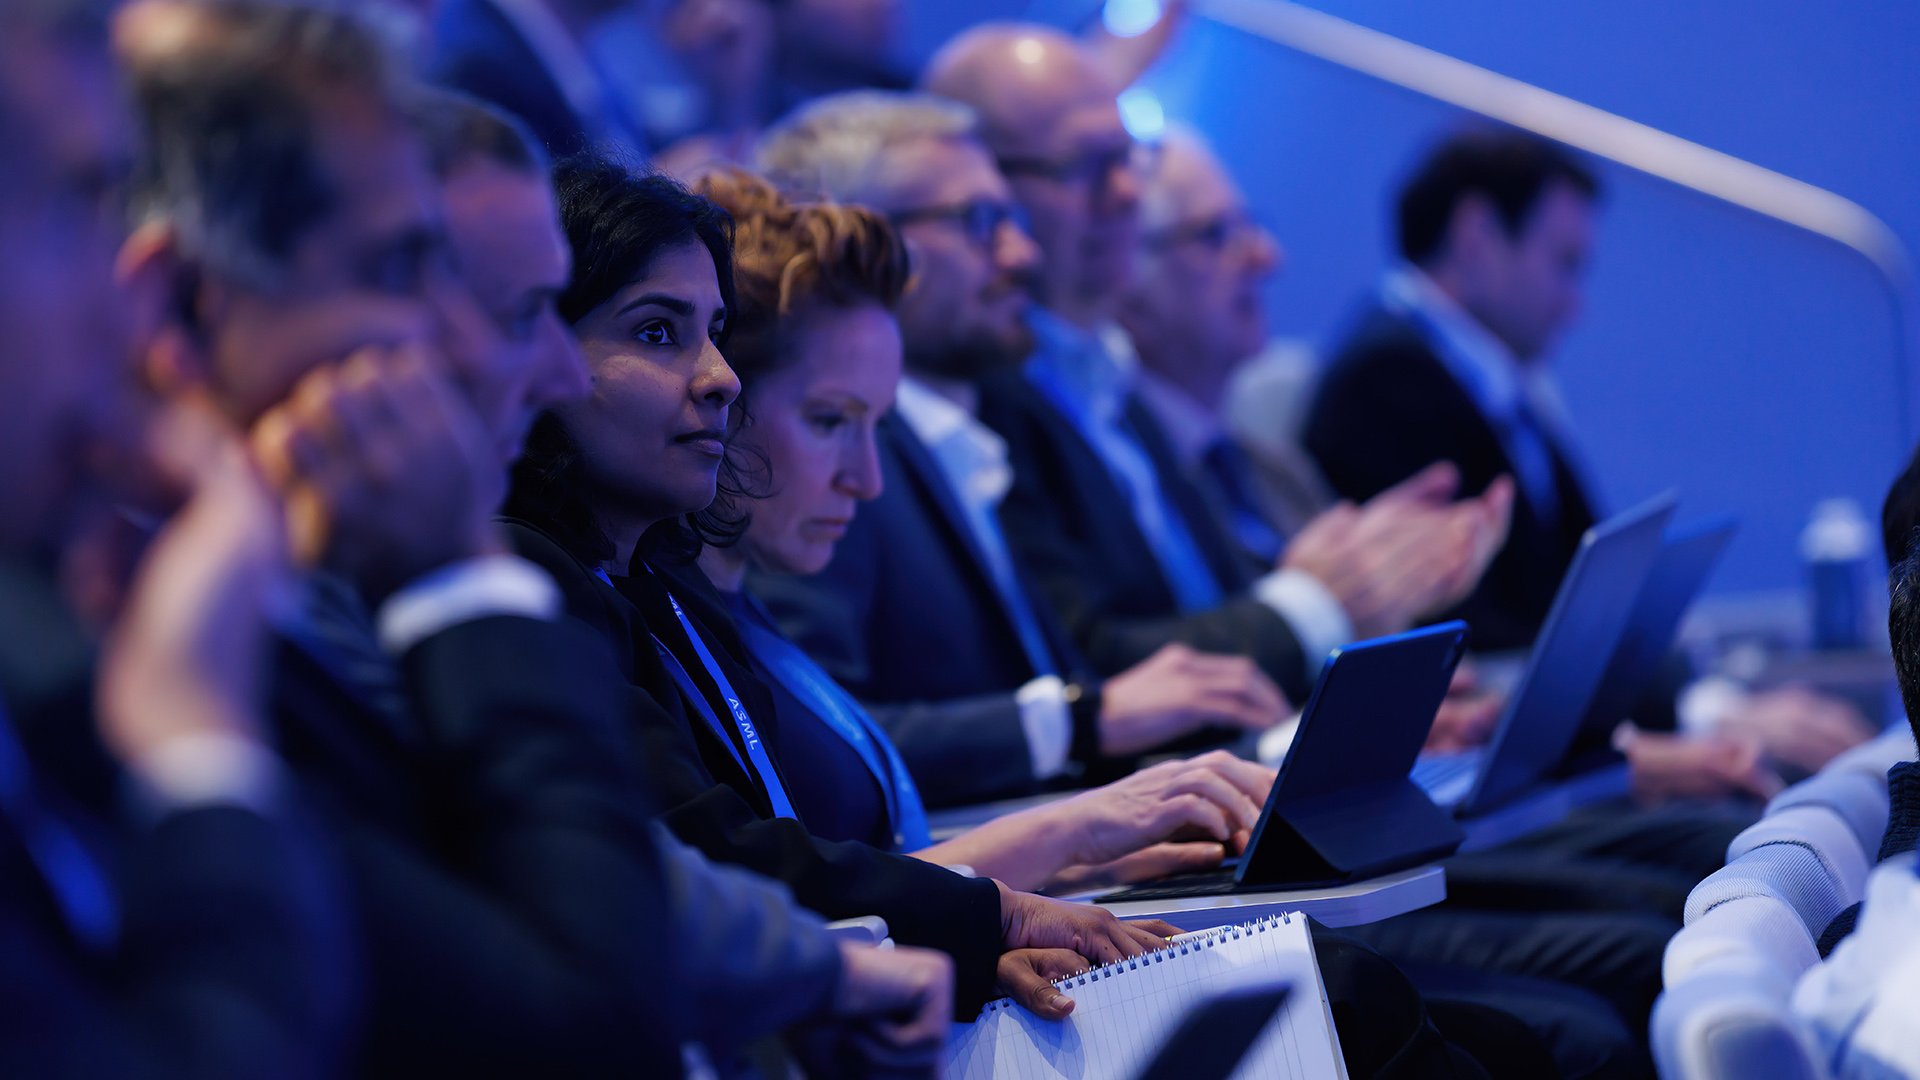 Attendees at Investor Day focusing intently on presentations, with some using laptops, captured in an ASML auditorium.